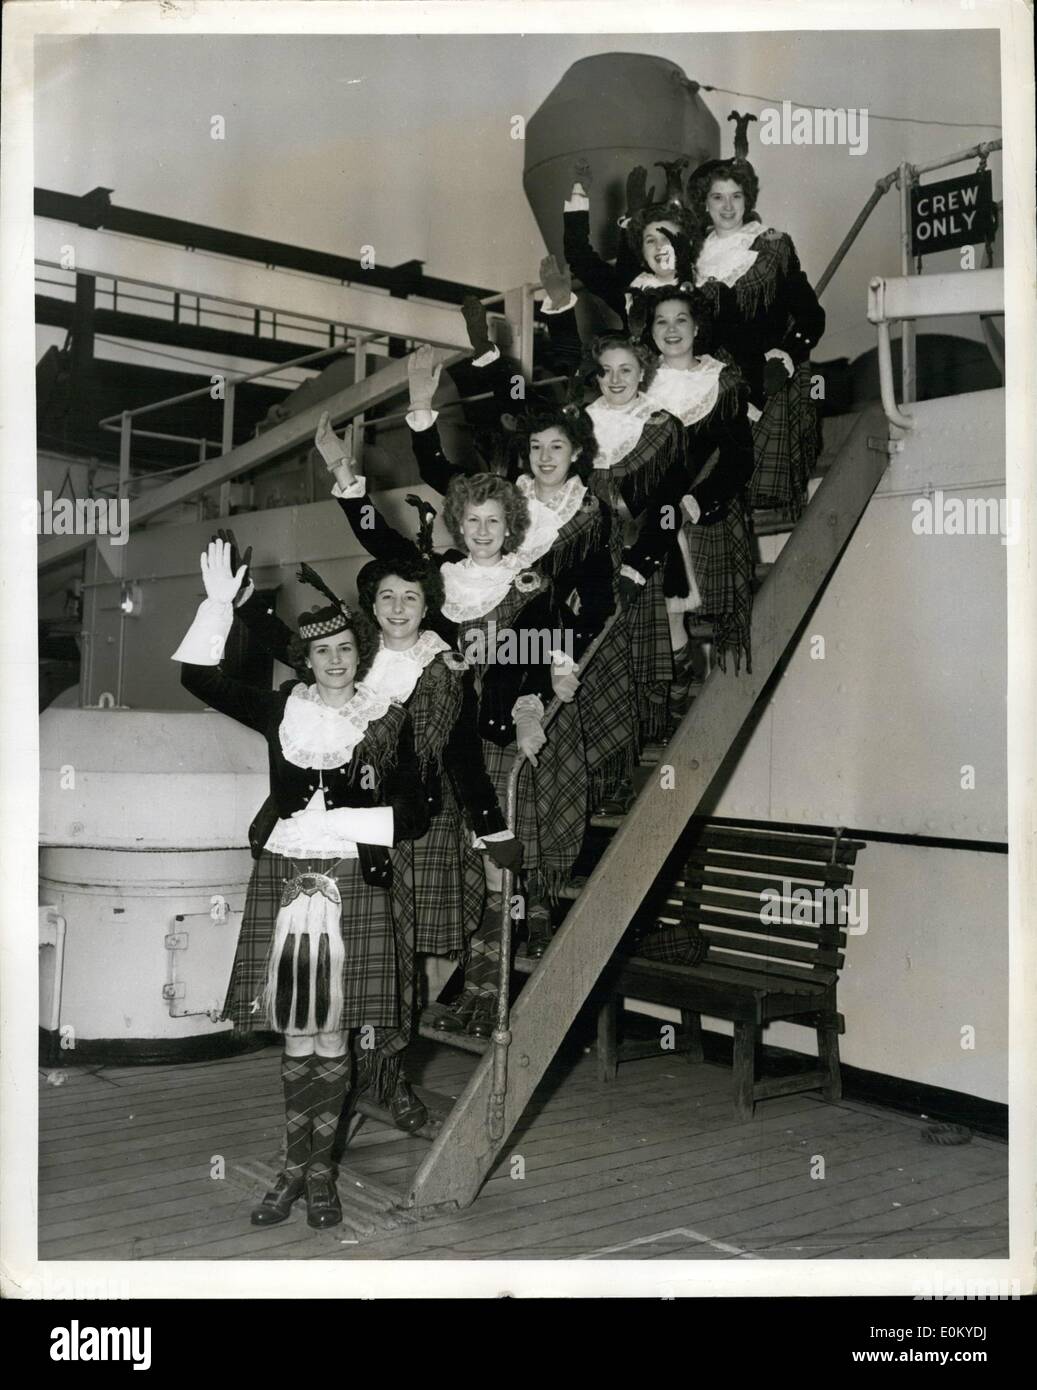 Sep. 09, 1952 - Dagenhan girl Pipers arrived in New York; A group of 10 Dagenham Girl Pipers arrive in New York on the Georgic for a 3 month tour of the US. The girls, ranning in age from 14 to 22 will appear at the Latin Quarter. Stock Photo